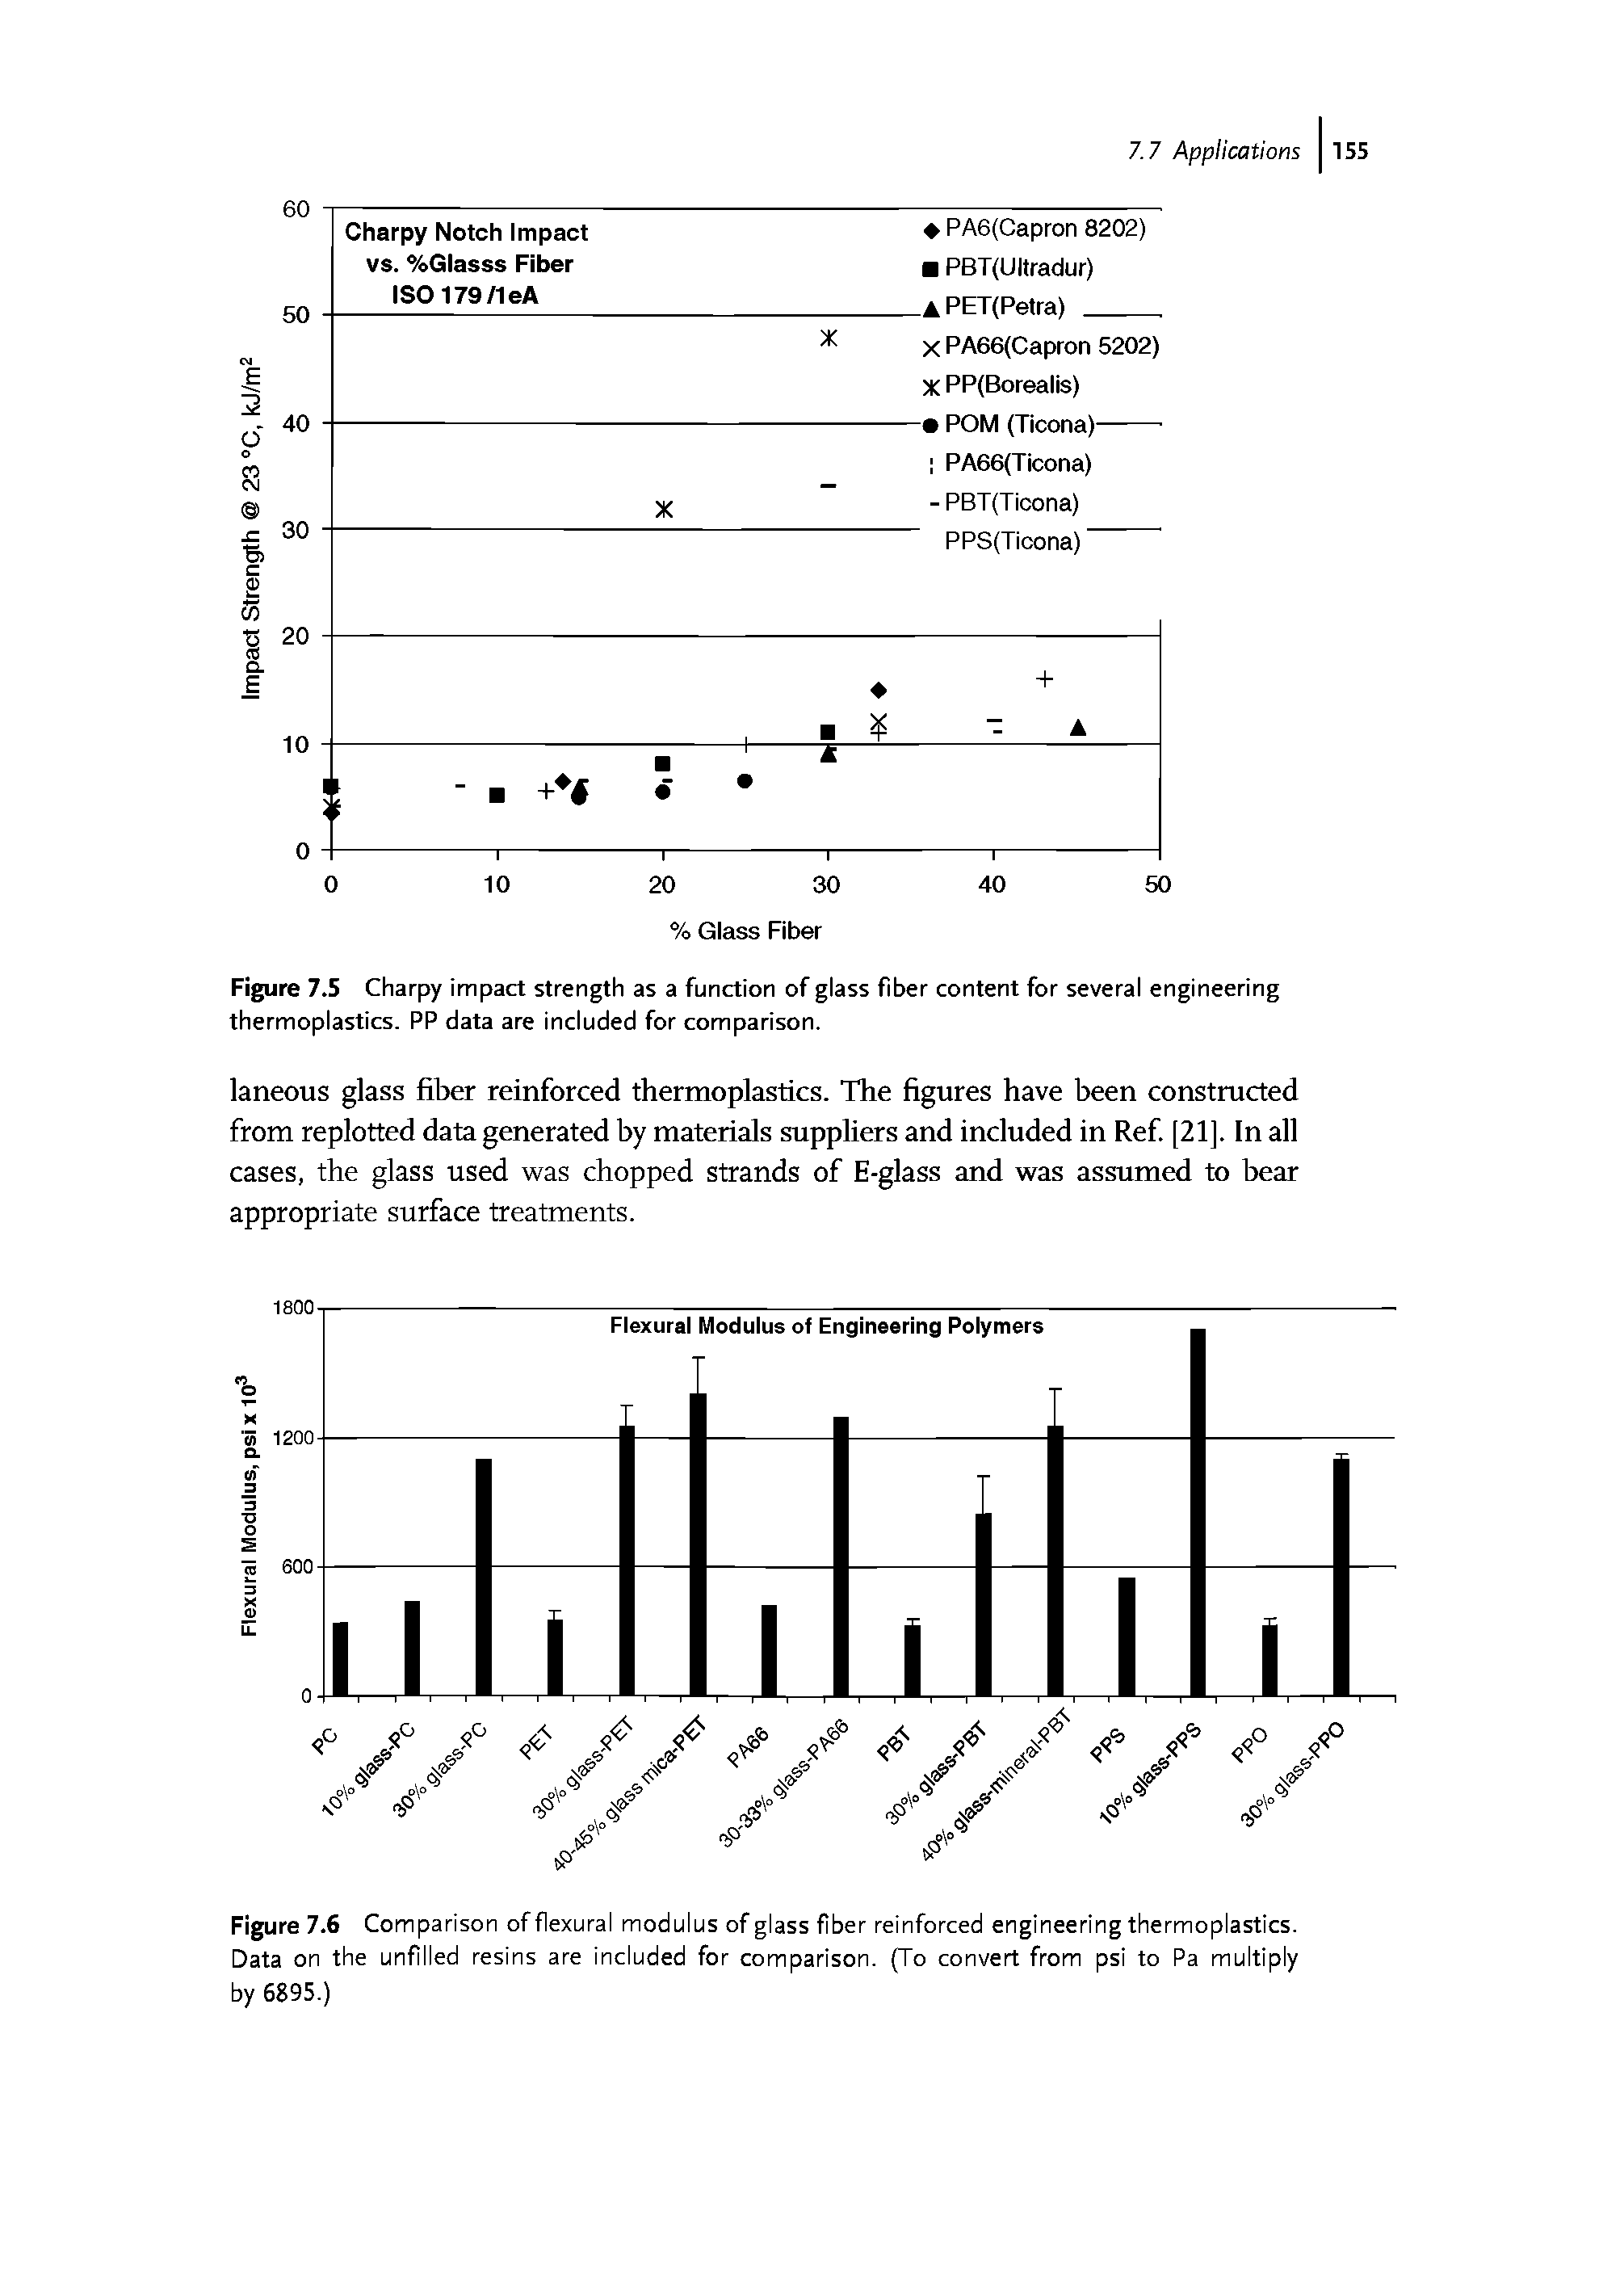 Figure 7.5 Charpy impact strength as a function of glass fiber content for several engineering thermoplastics. PP data are included for comparison.